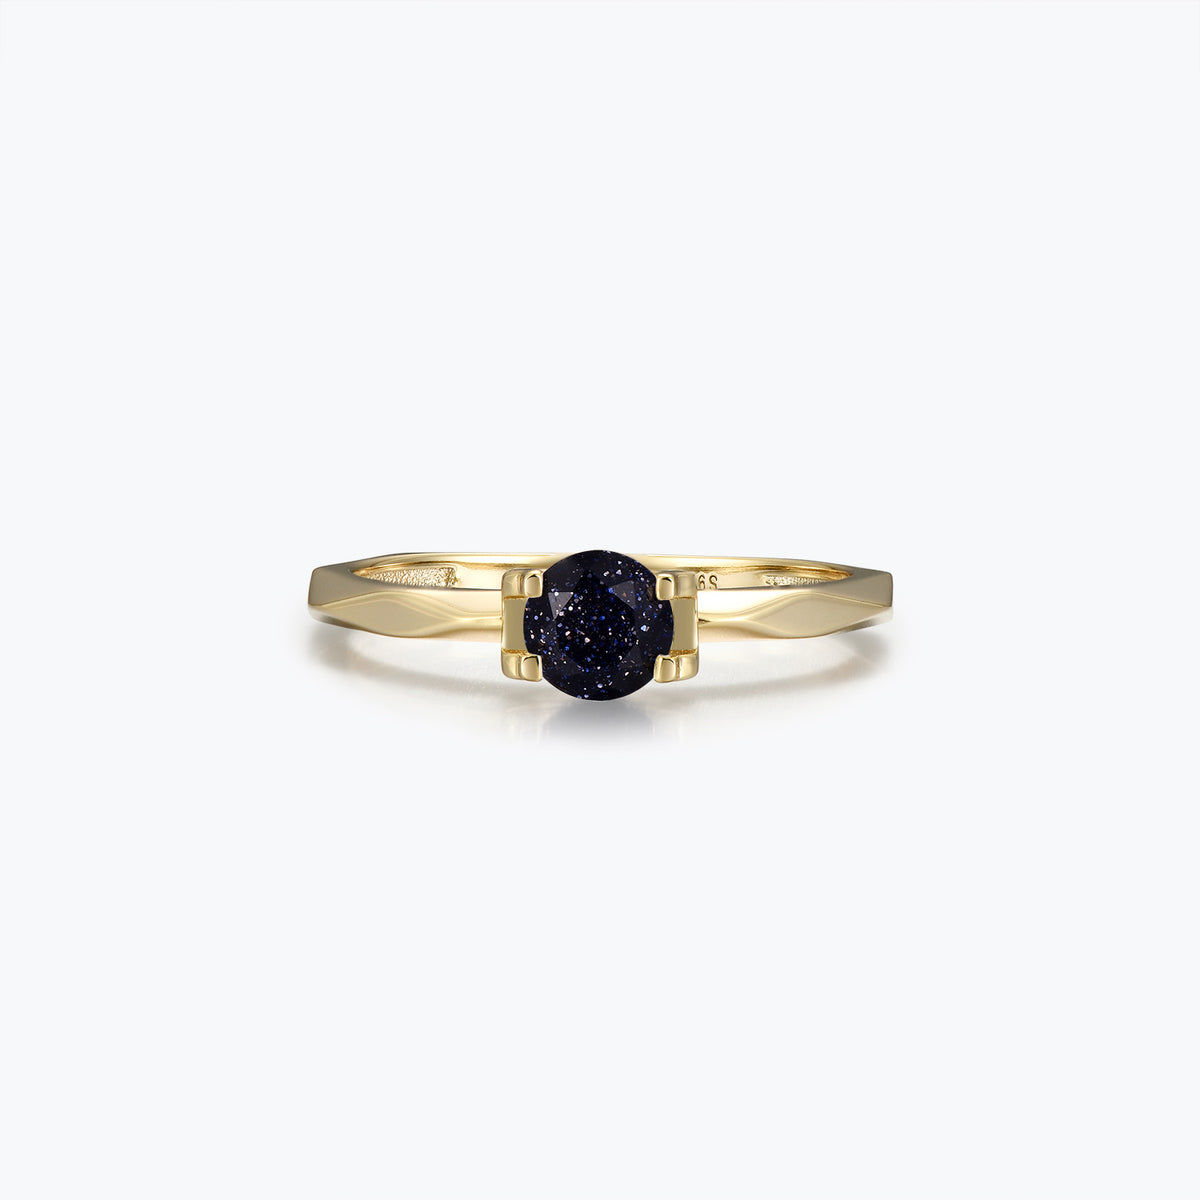 Dissoo® Gold Round Multi-faceted Blue Goldstone Engagement Wedding Ring